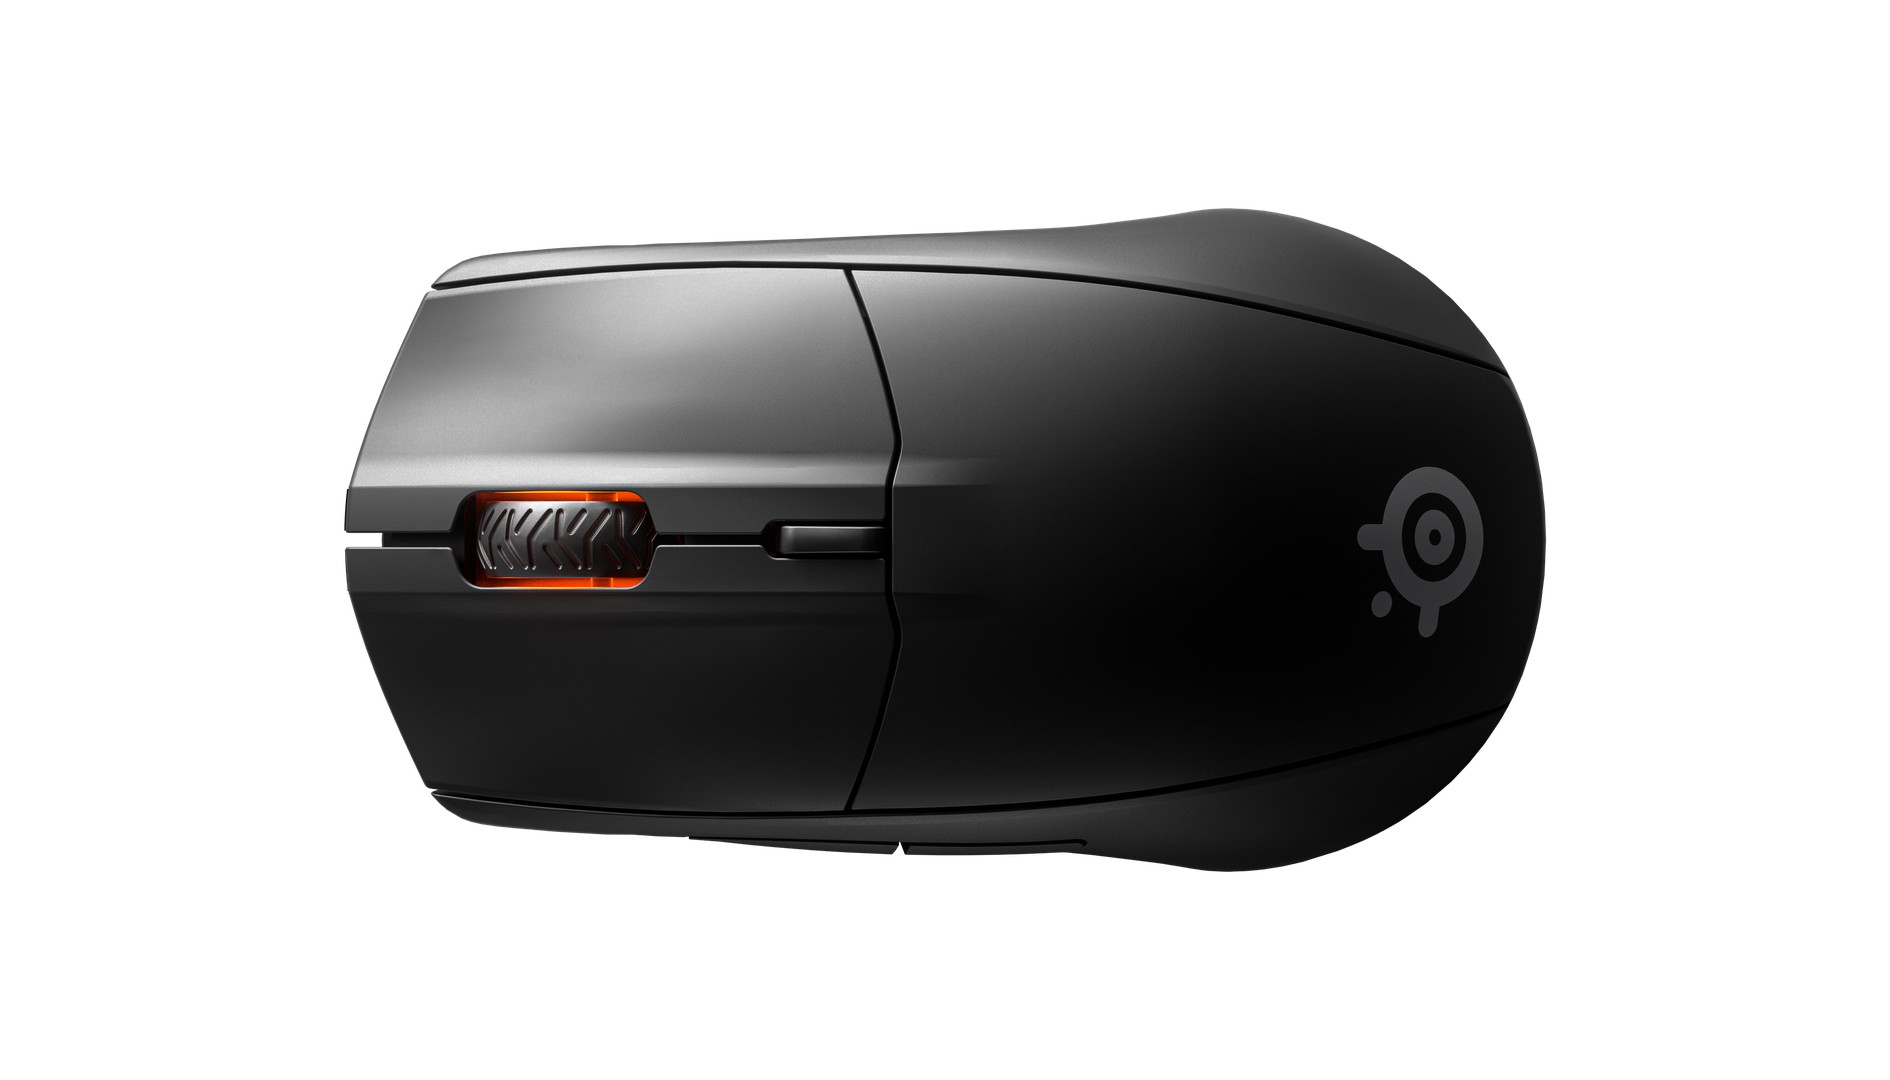 steelseries 3 mouse